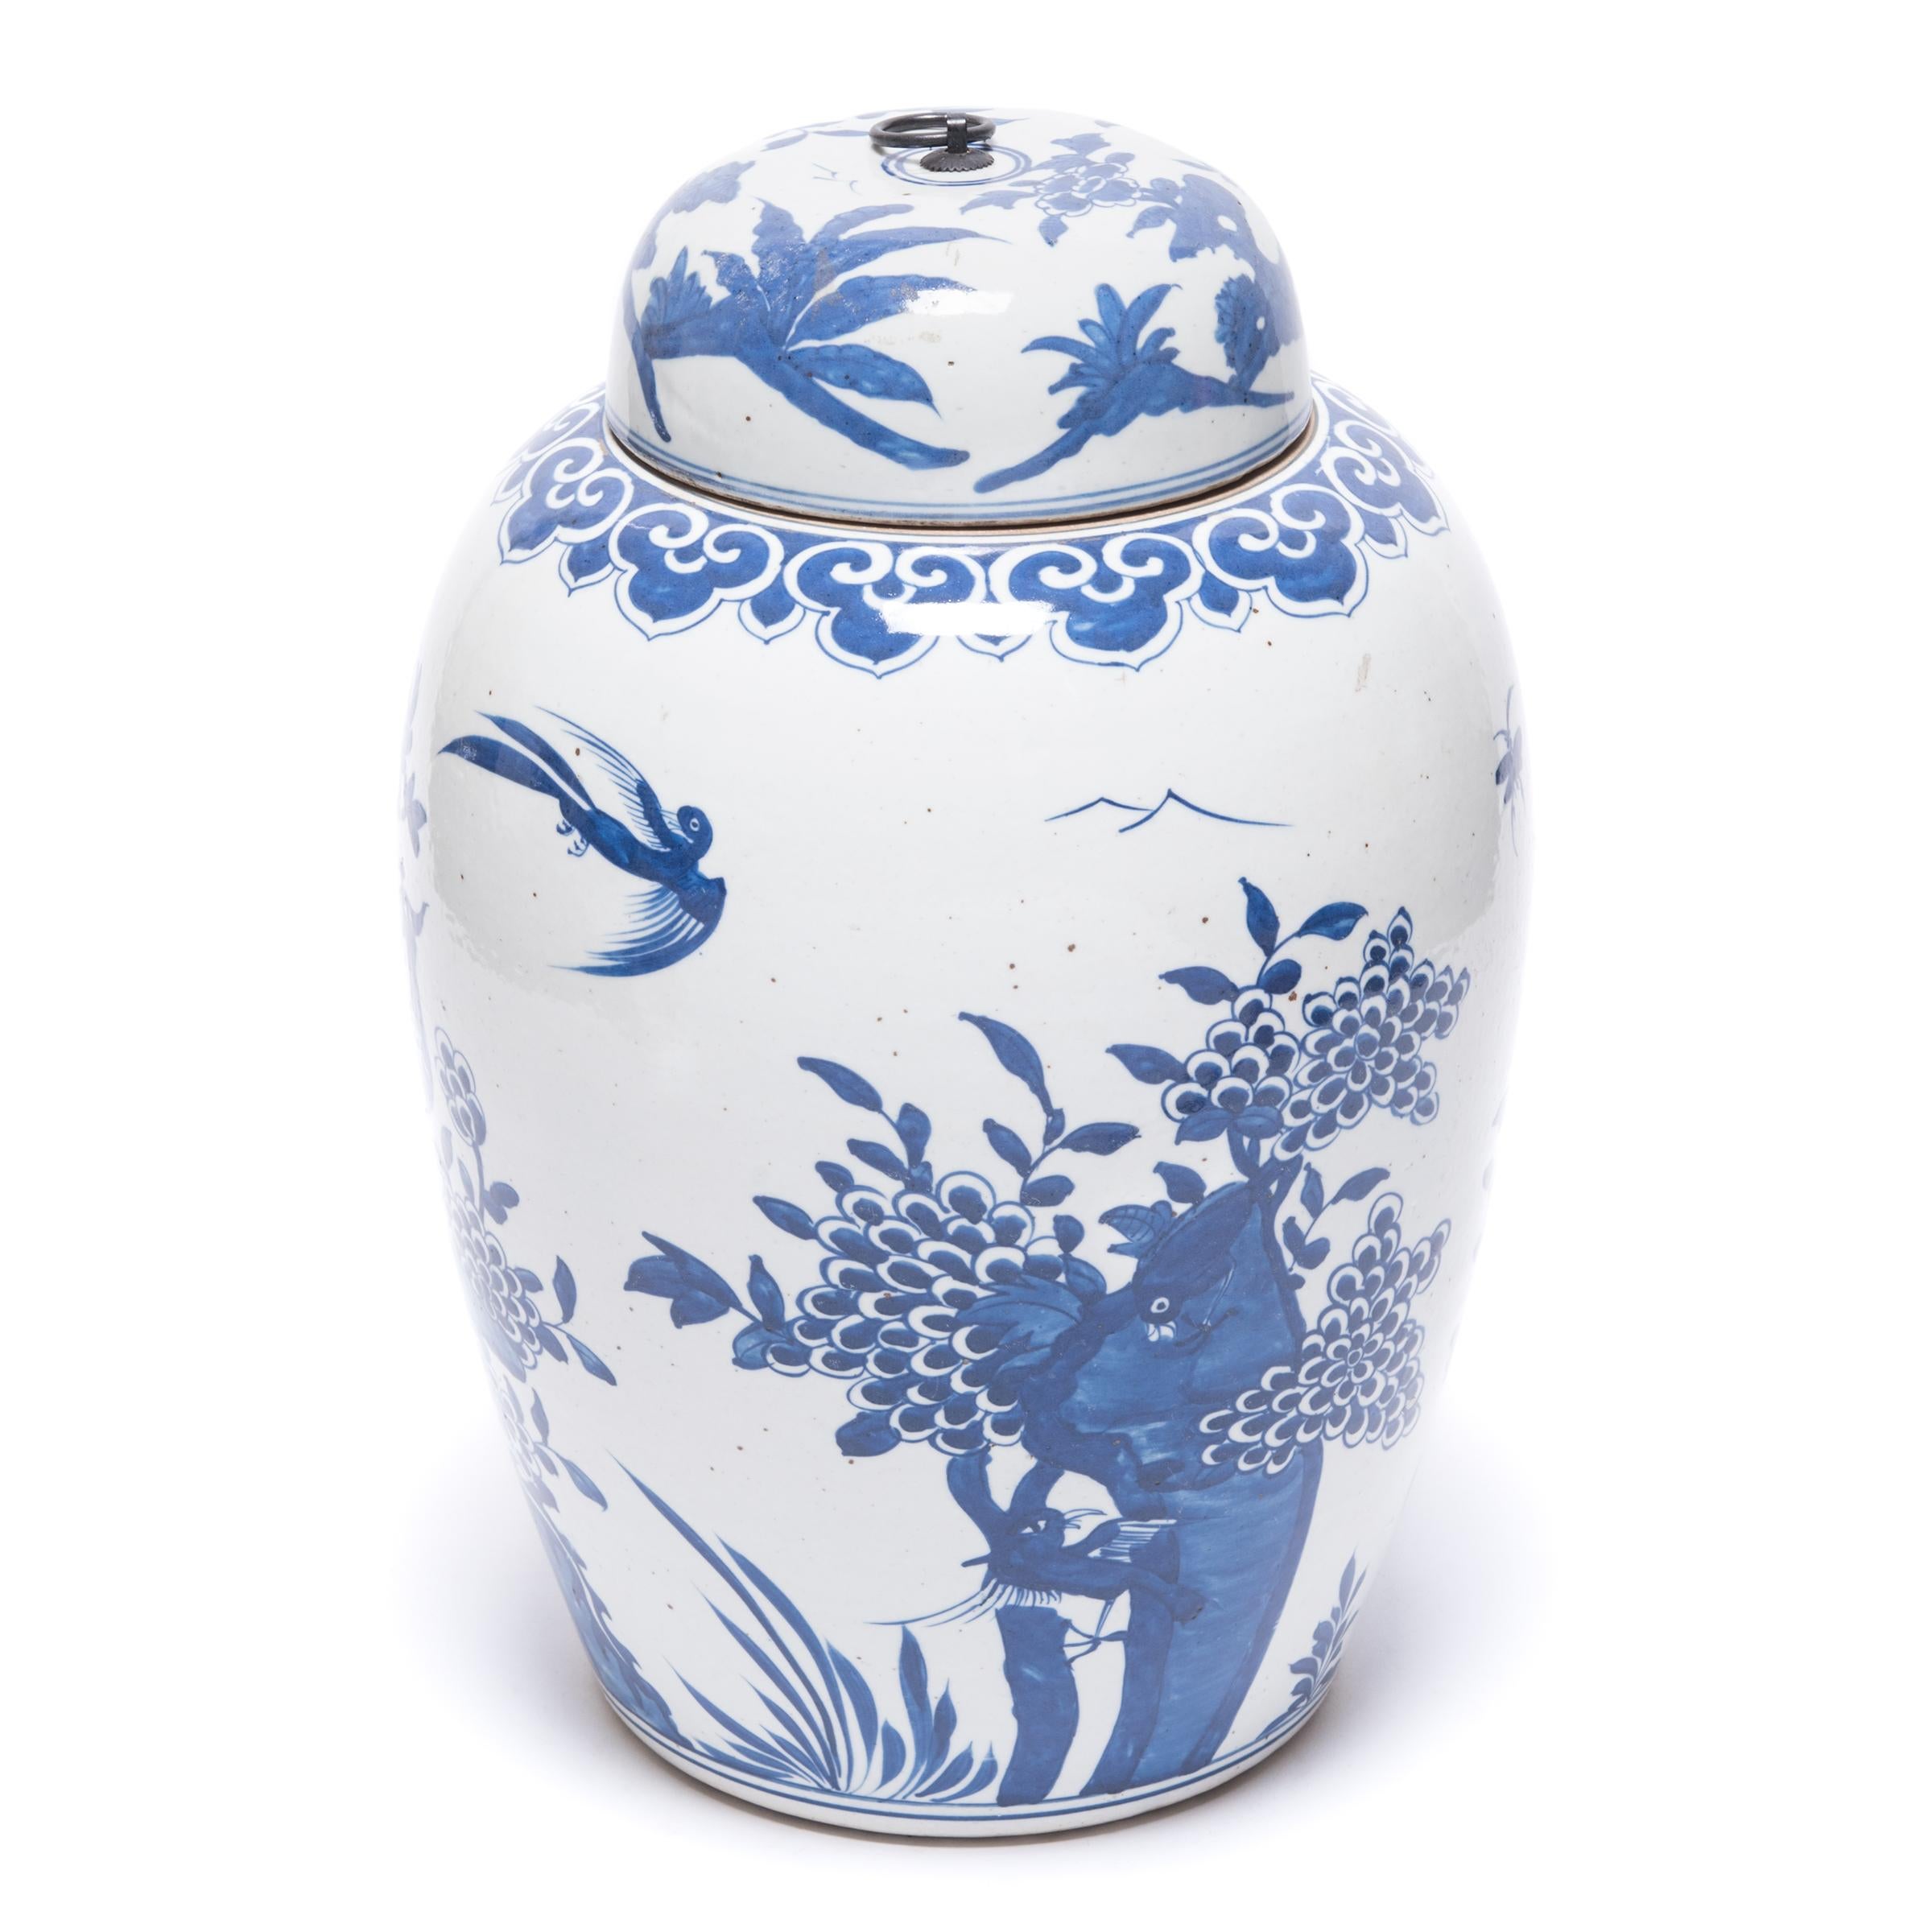 Designed to store tea leaves, this jar is nonetheless a stunning example of blue and white porcelain. Surrounded by peonies and chrysanthemum blossoms, two phoenixes sit perched upon a rocky outcropping. The pair's plumage suggests that one is male